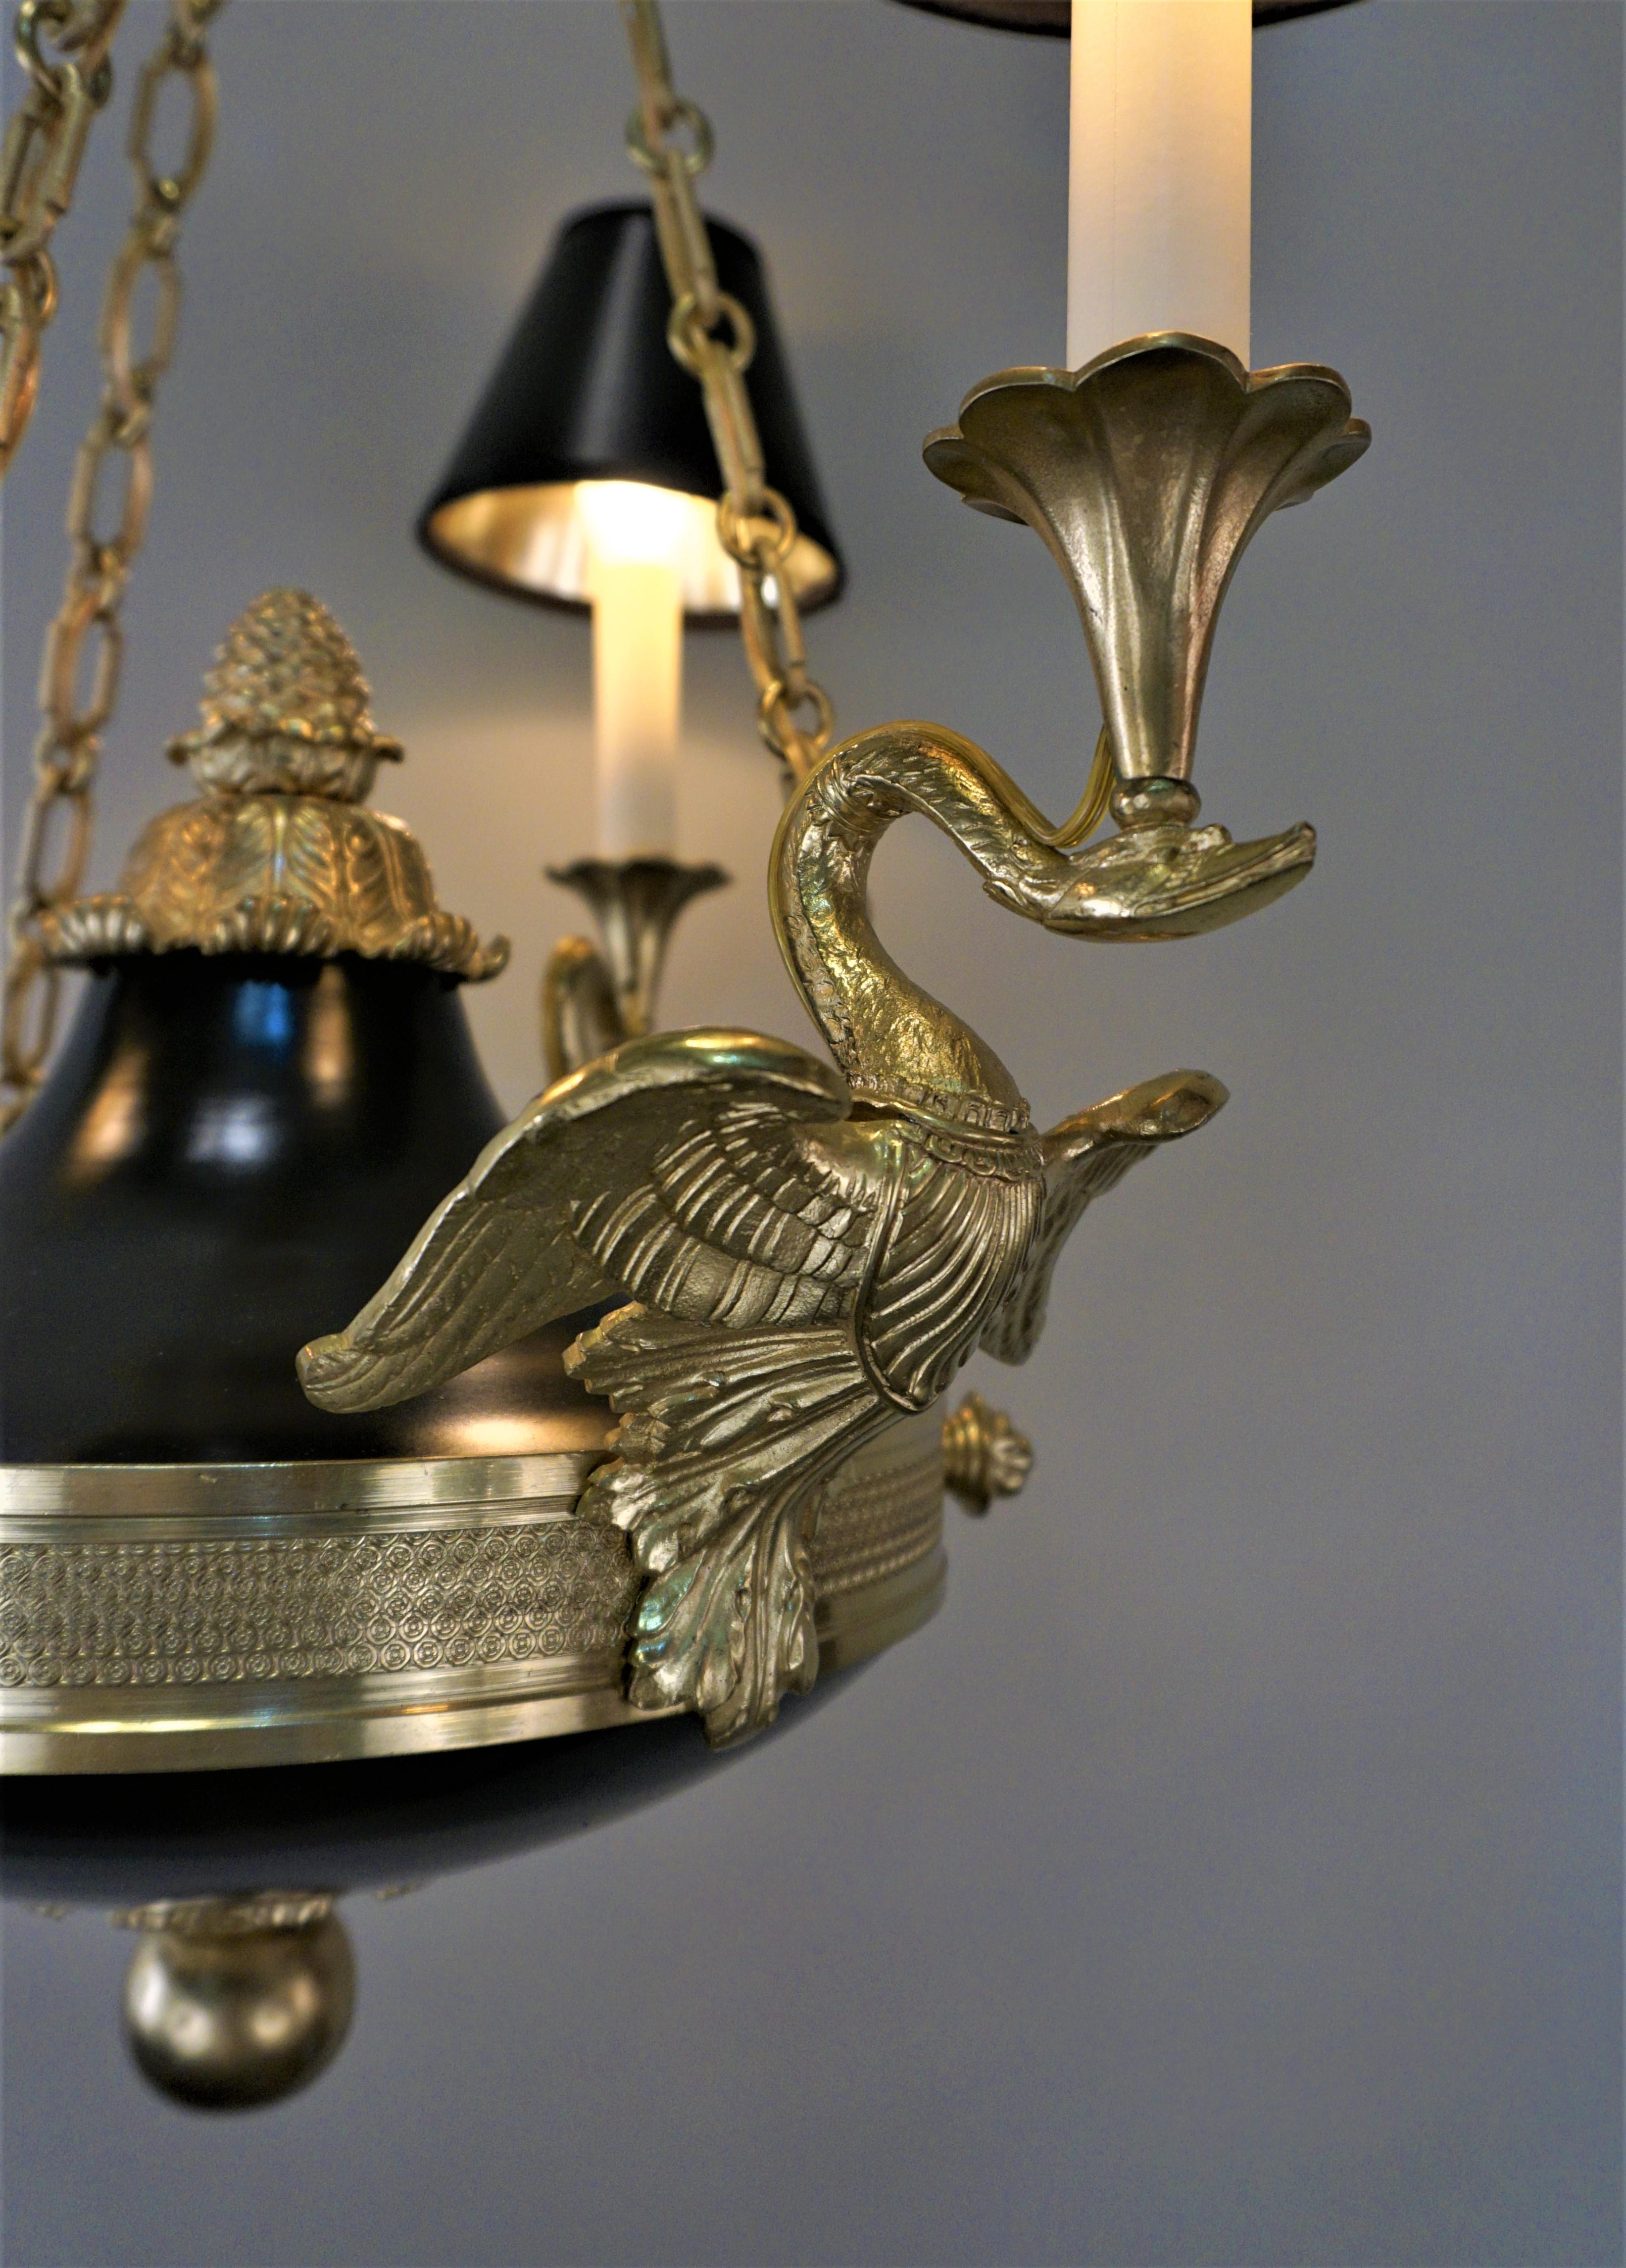 French 1920s Empire style swan arms bronze chandelier.
Height include all the chain.